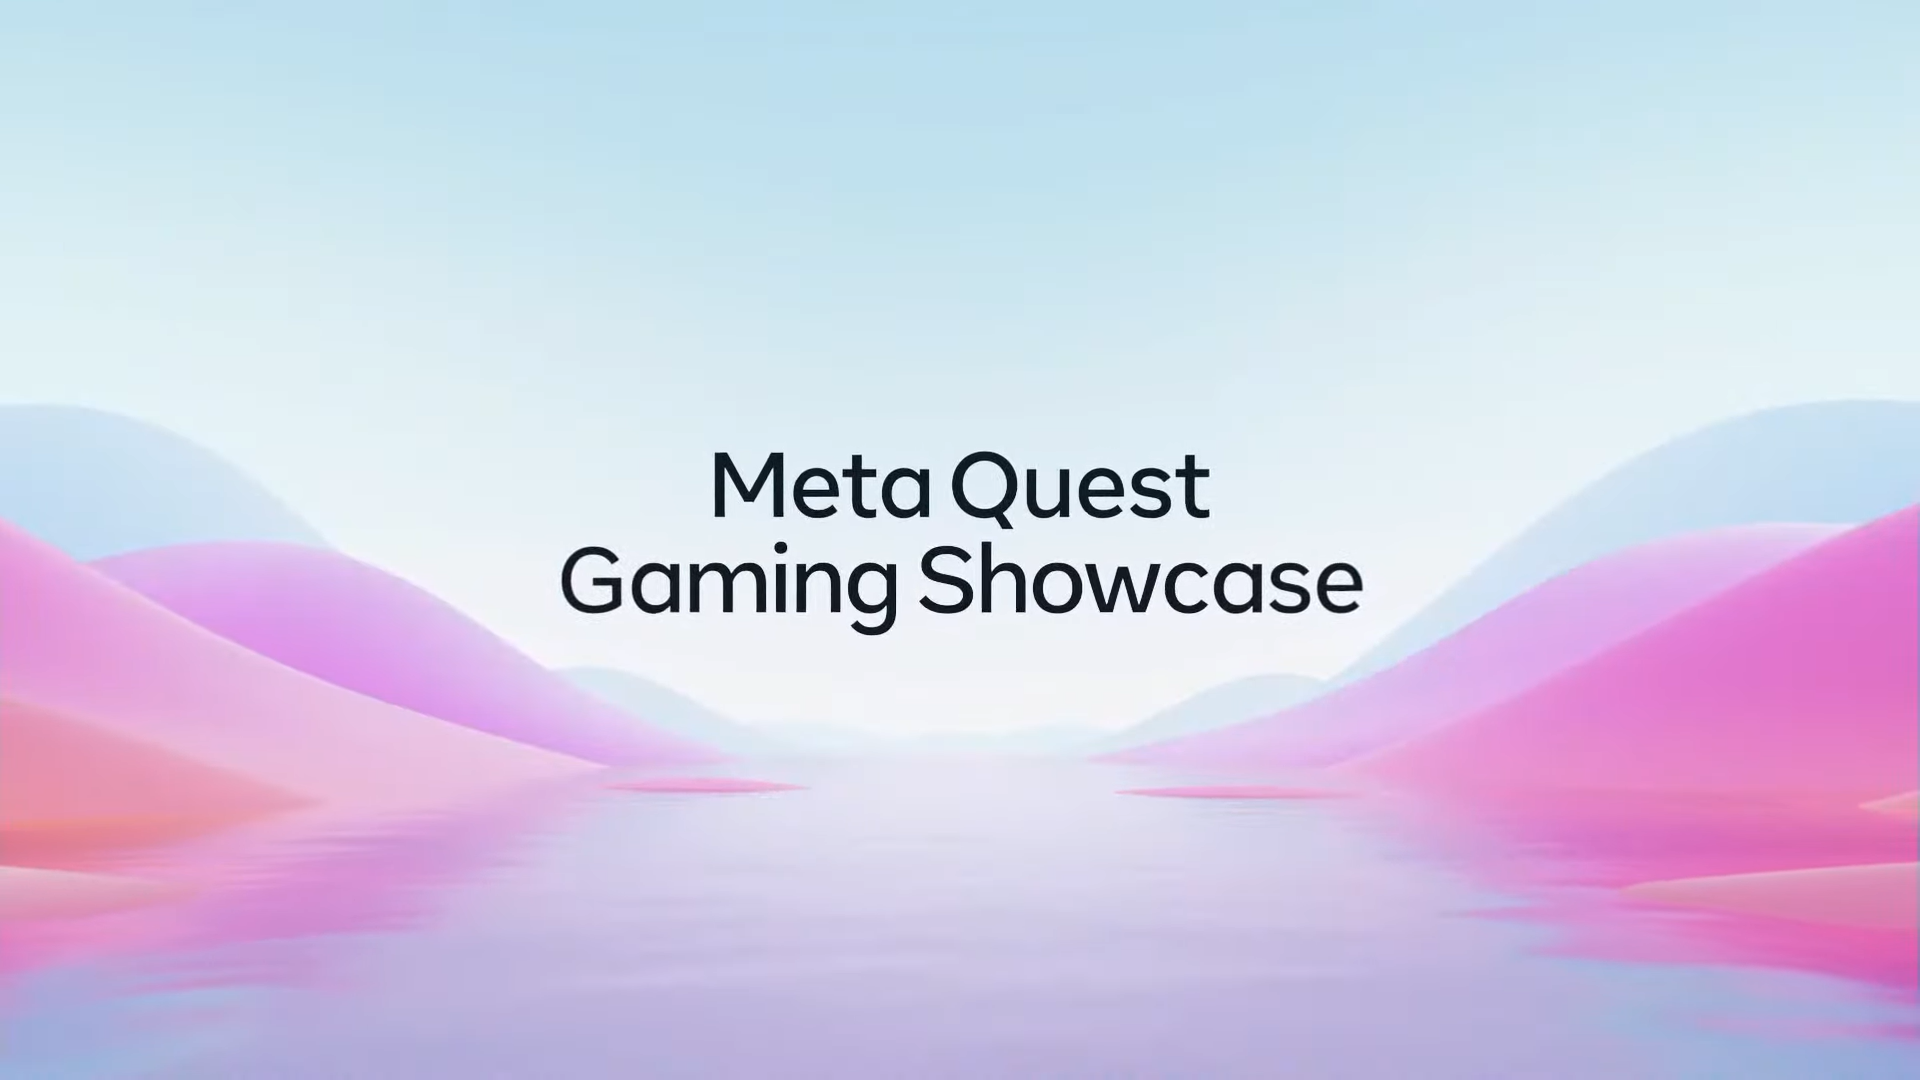 Exciting VR Games Announcements at Meta Quest Gaming Showcase 2022